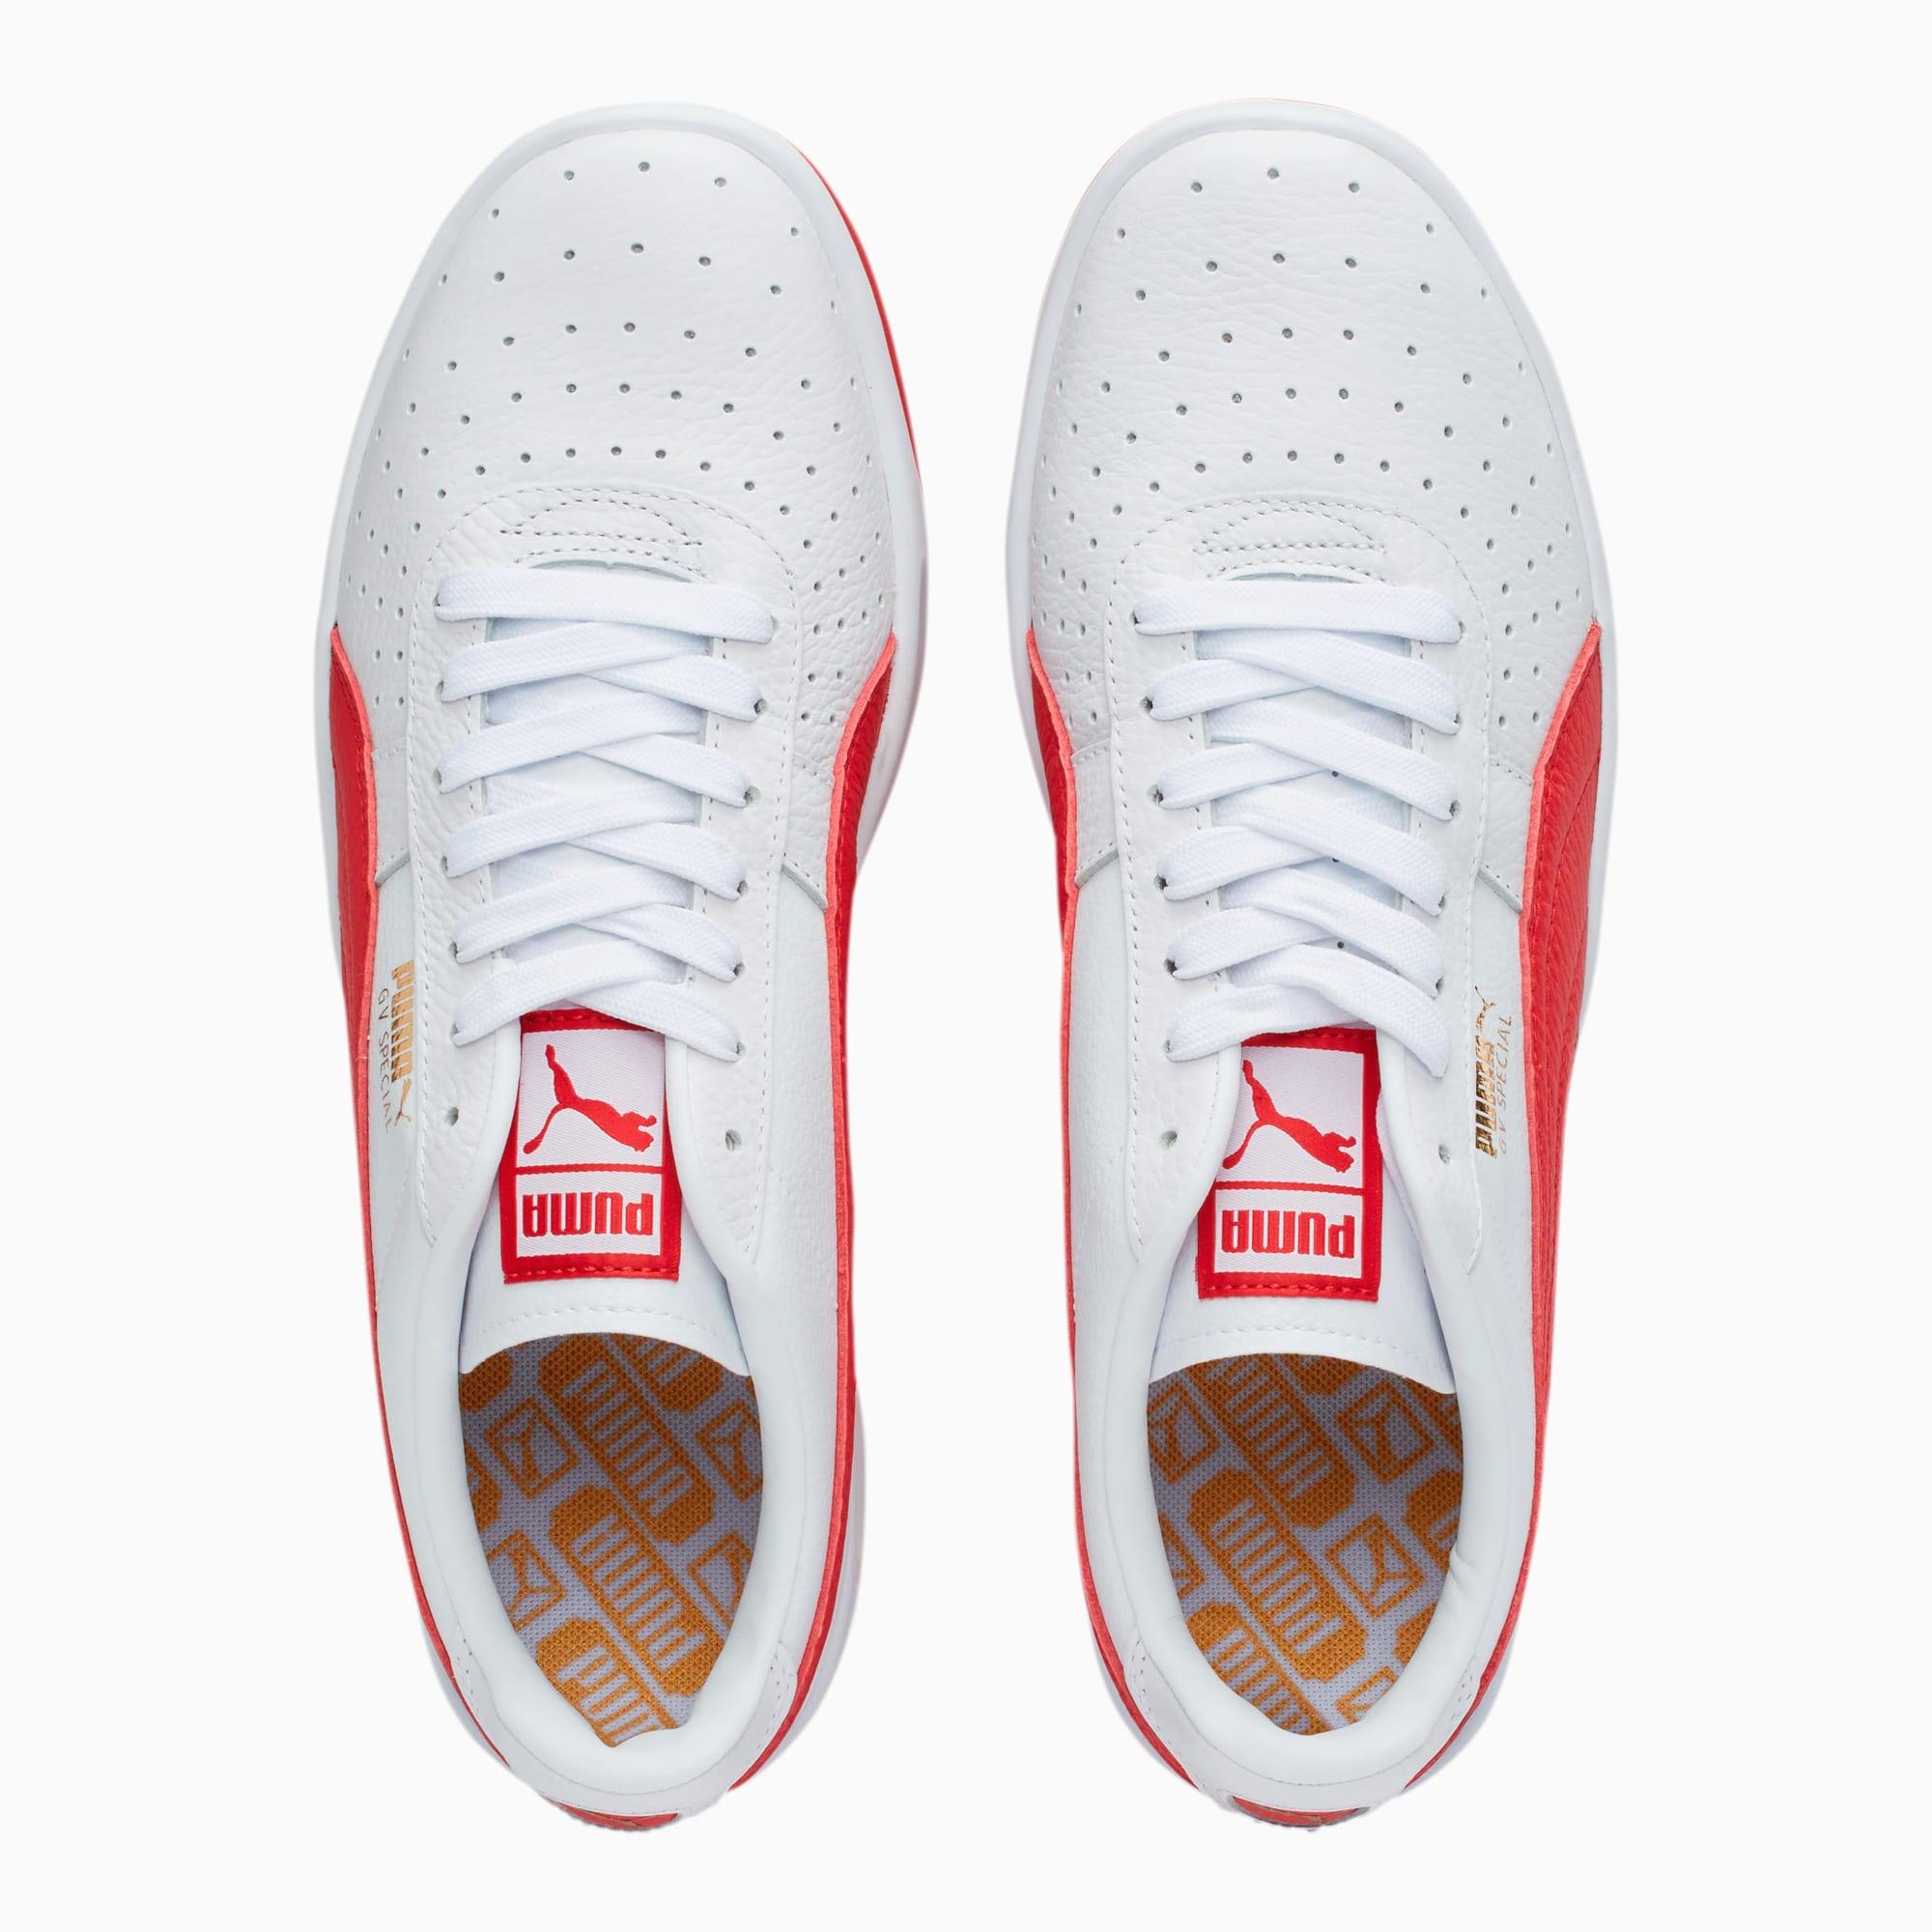 PUMA Leather Gv Special+ Sneakers in Red for Men - Save 37% - Lyst